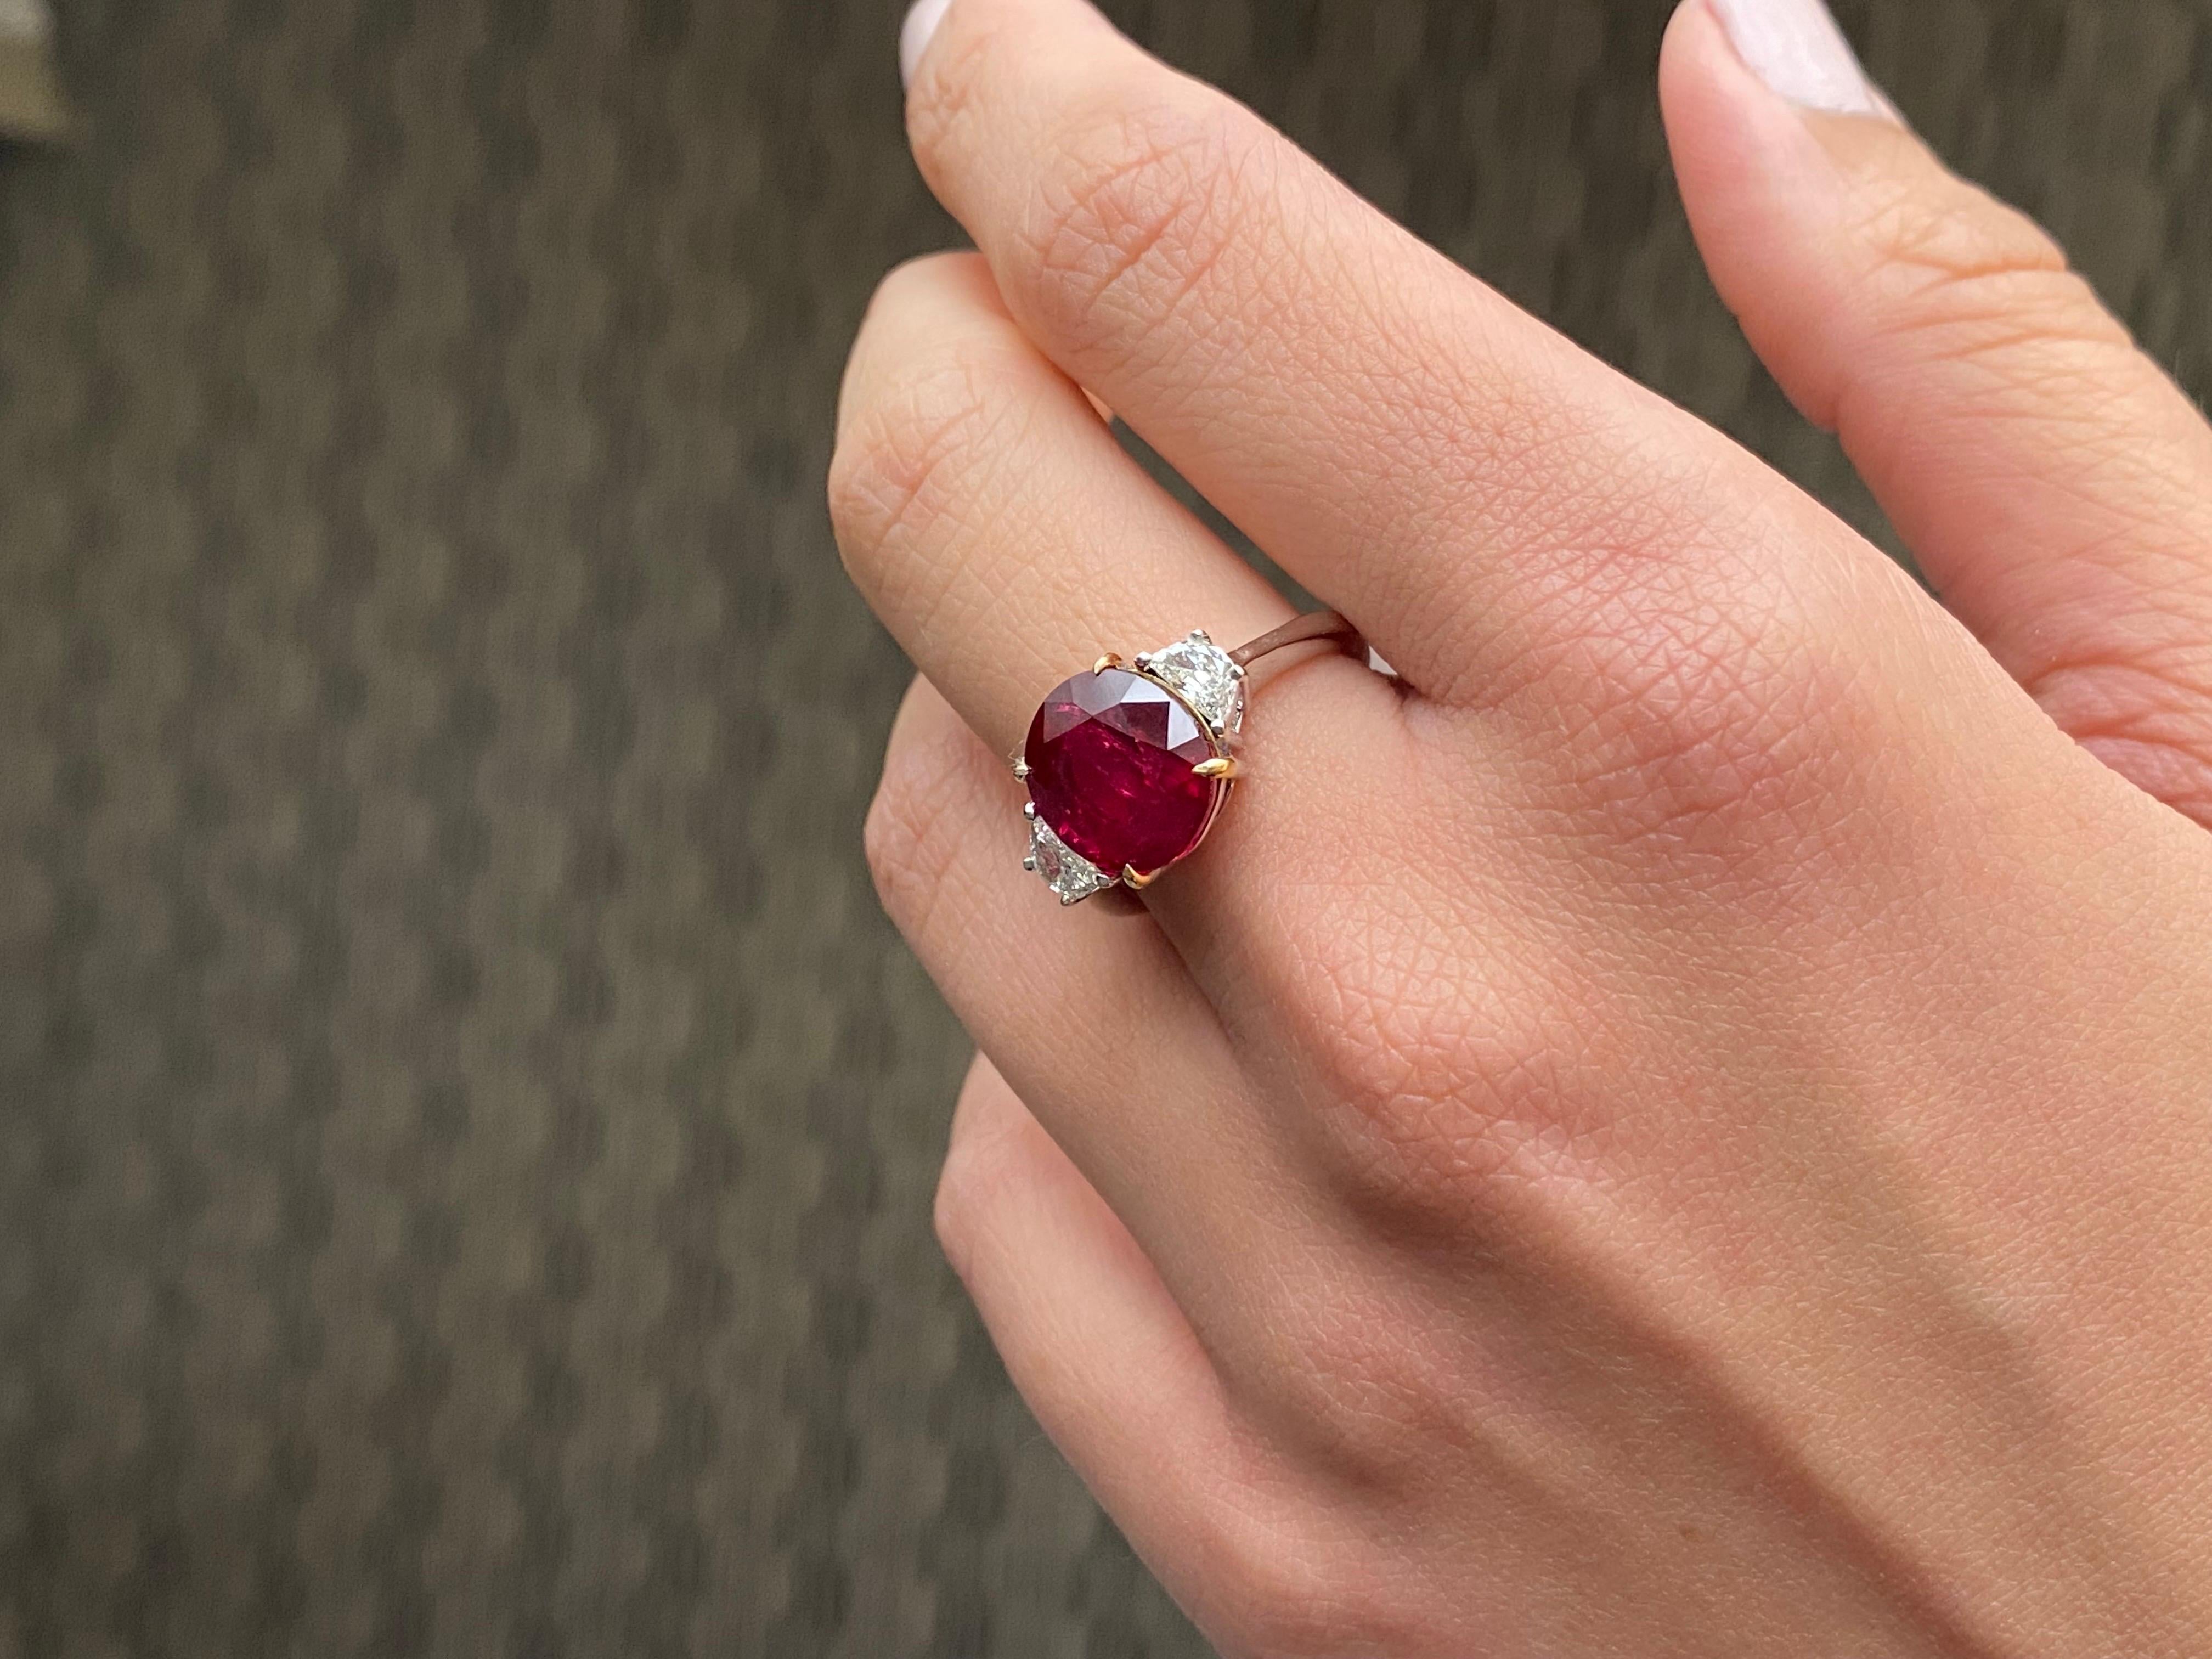 A stunning 6.22 Carat natural Ruby, with 0.38 Carat VS quality Diamond side stones. The center stone, natural Ruby, has a beautiful Pigeon Blood - vivid red color, which is considered the best color for Rubies. The stone is transparent, with very